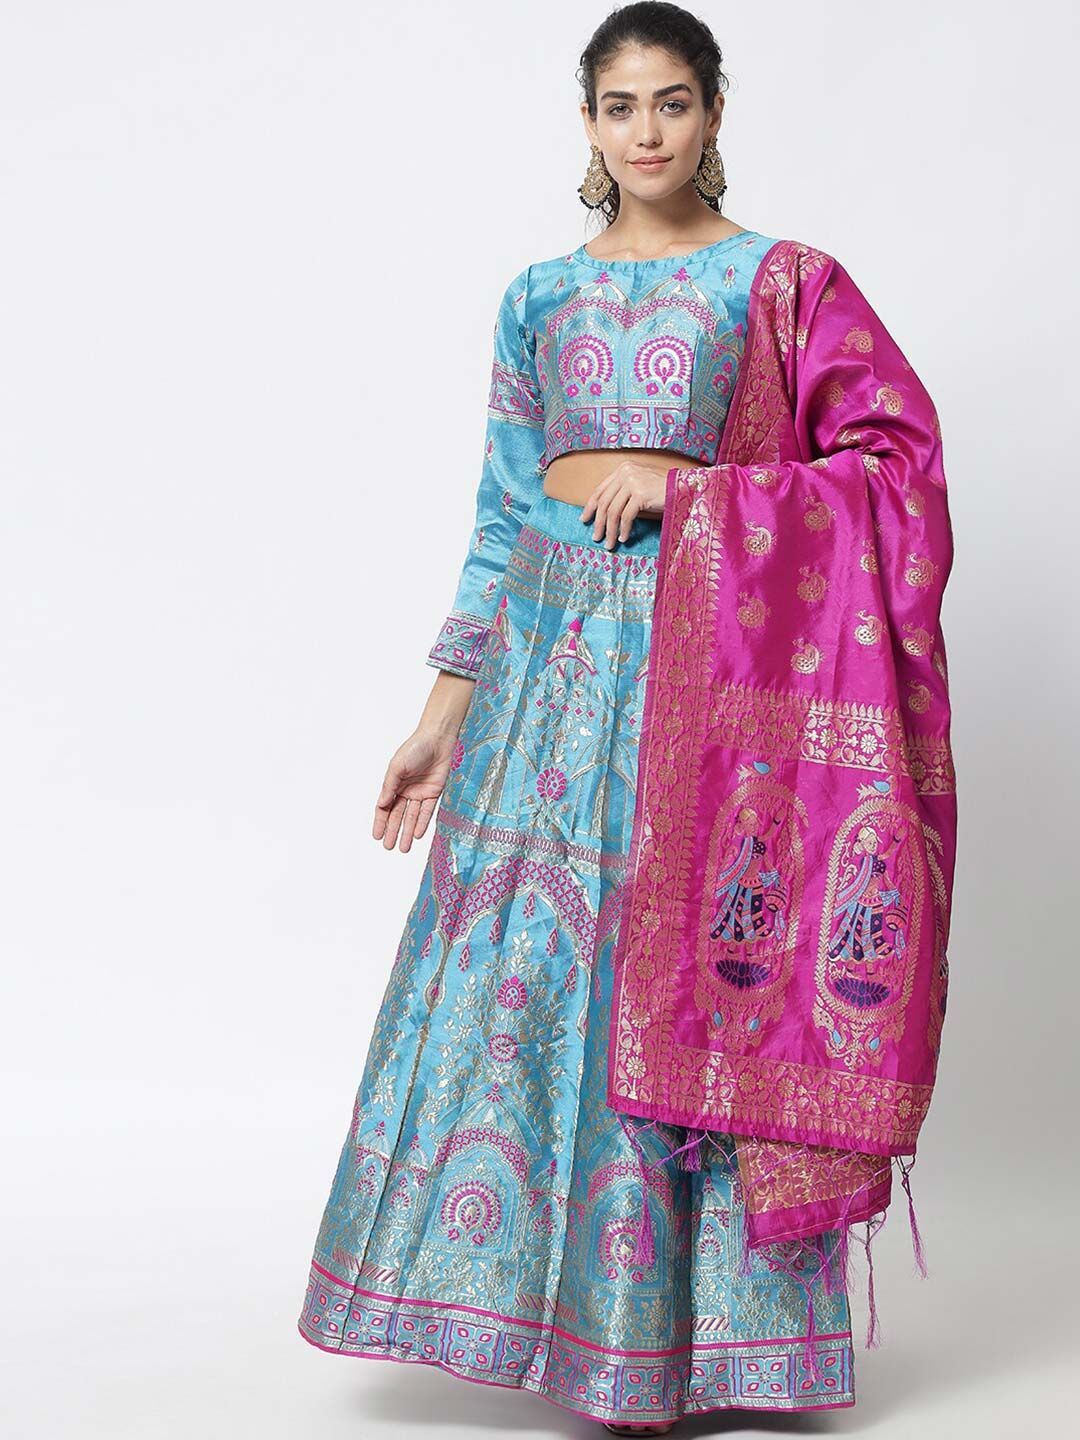 DIVASTRI Turquoise Blue & Pink Semi-Stitched Lehenga & Unstitched Blouse With Dupatta Price in India